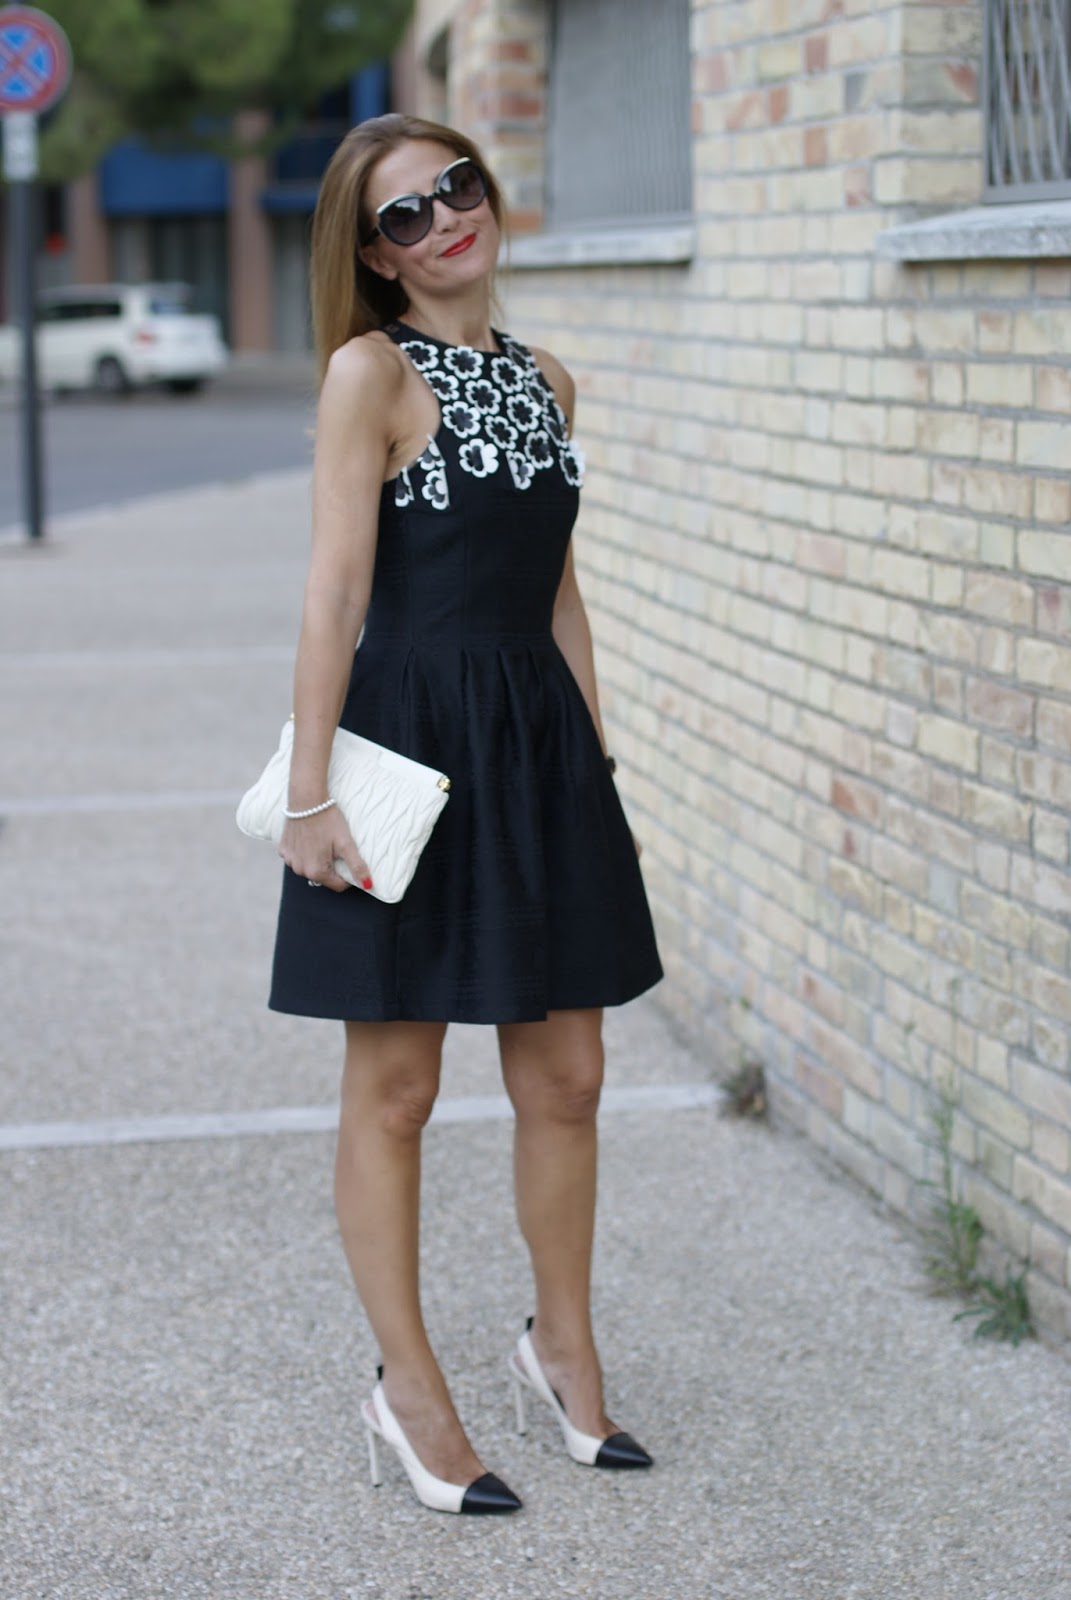 #DesigualSales black dress with 3d flowers and cap toe pumps on Fashion and Cookies fashion blog, fashion blogger style